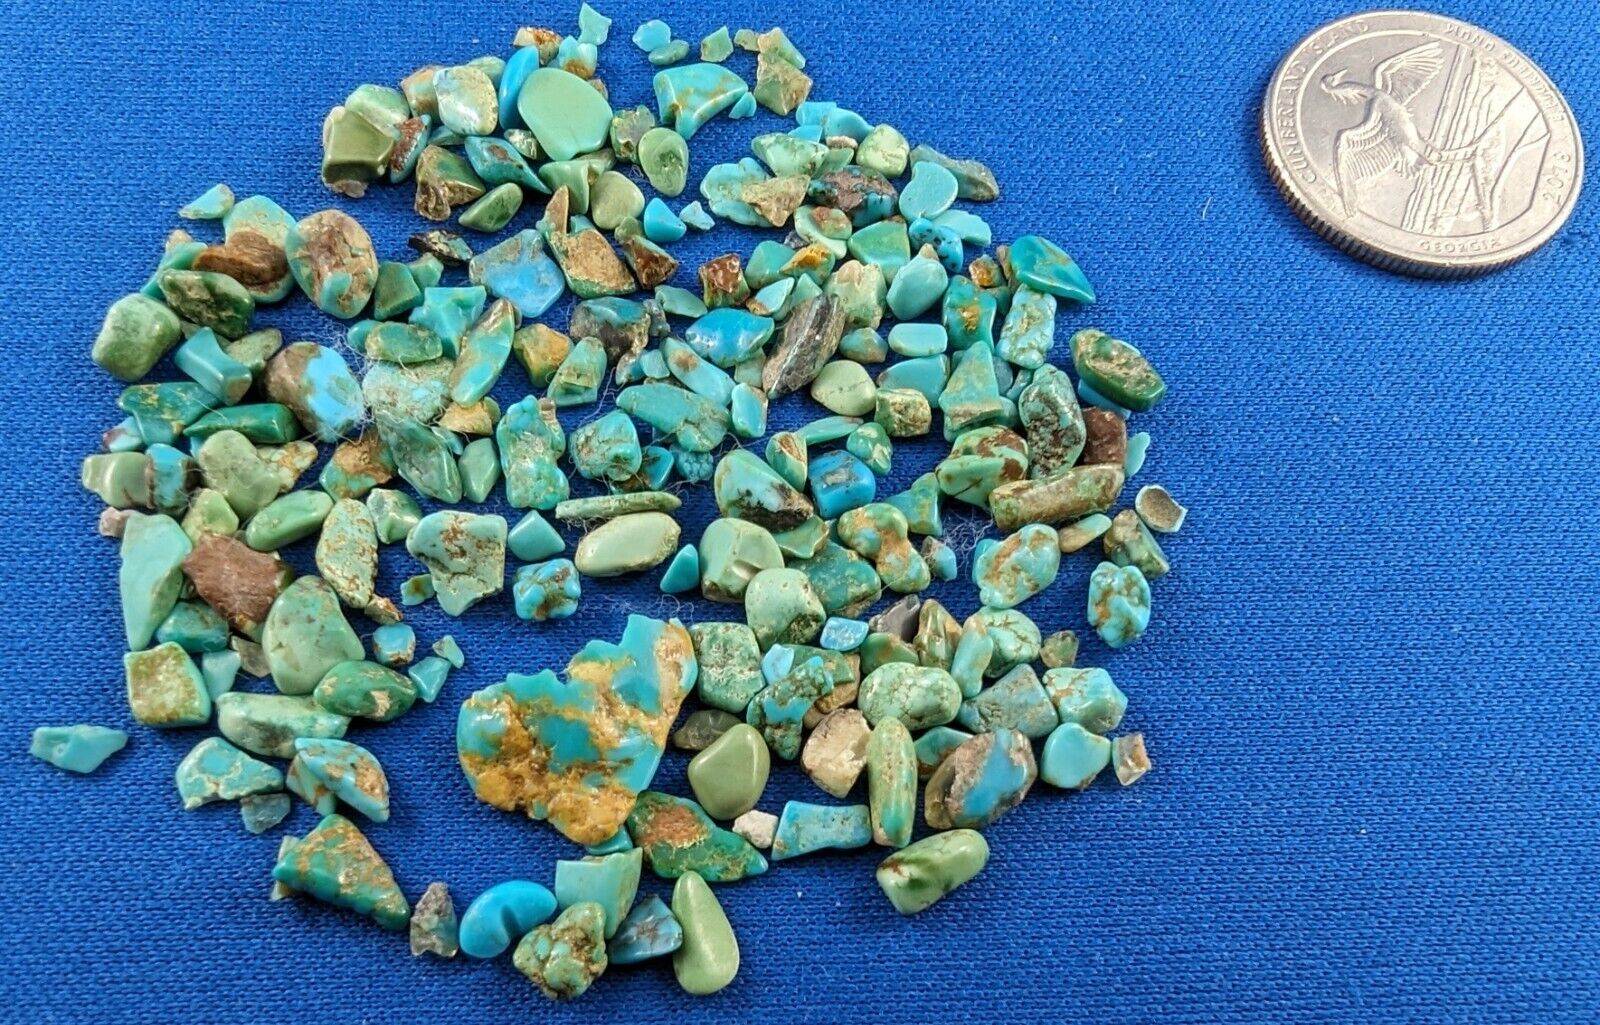 Lot Stabilize Loose small  Genuine Turquoise Stones.